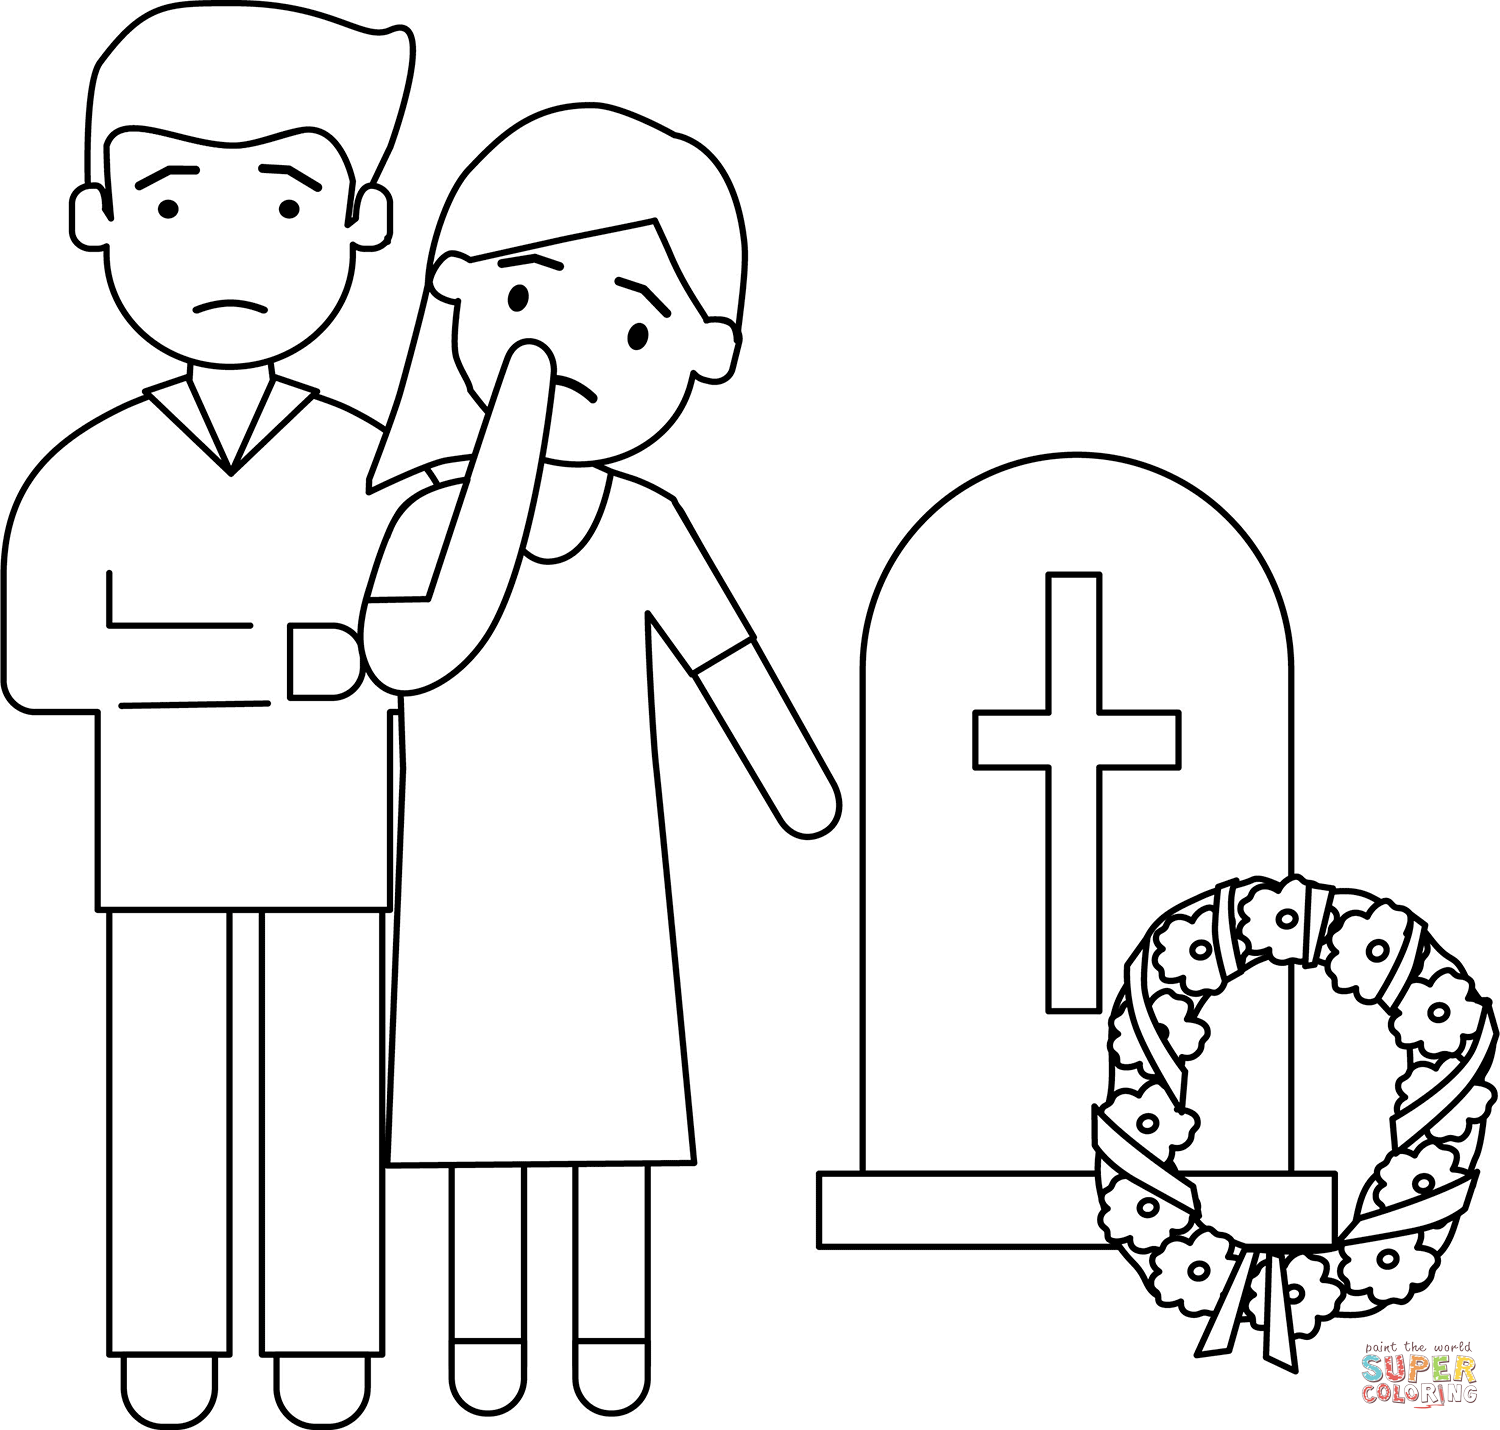 Funeral coloring page free printable coloring pages